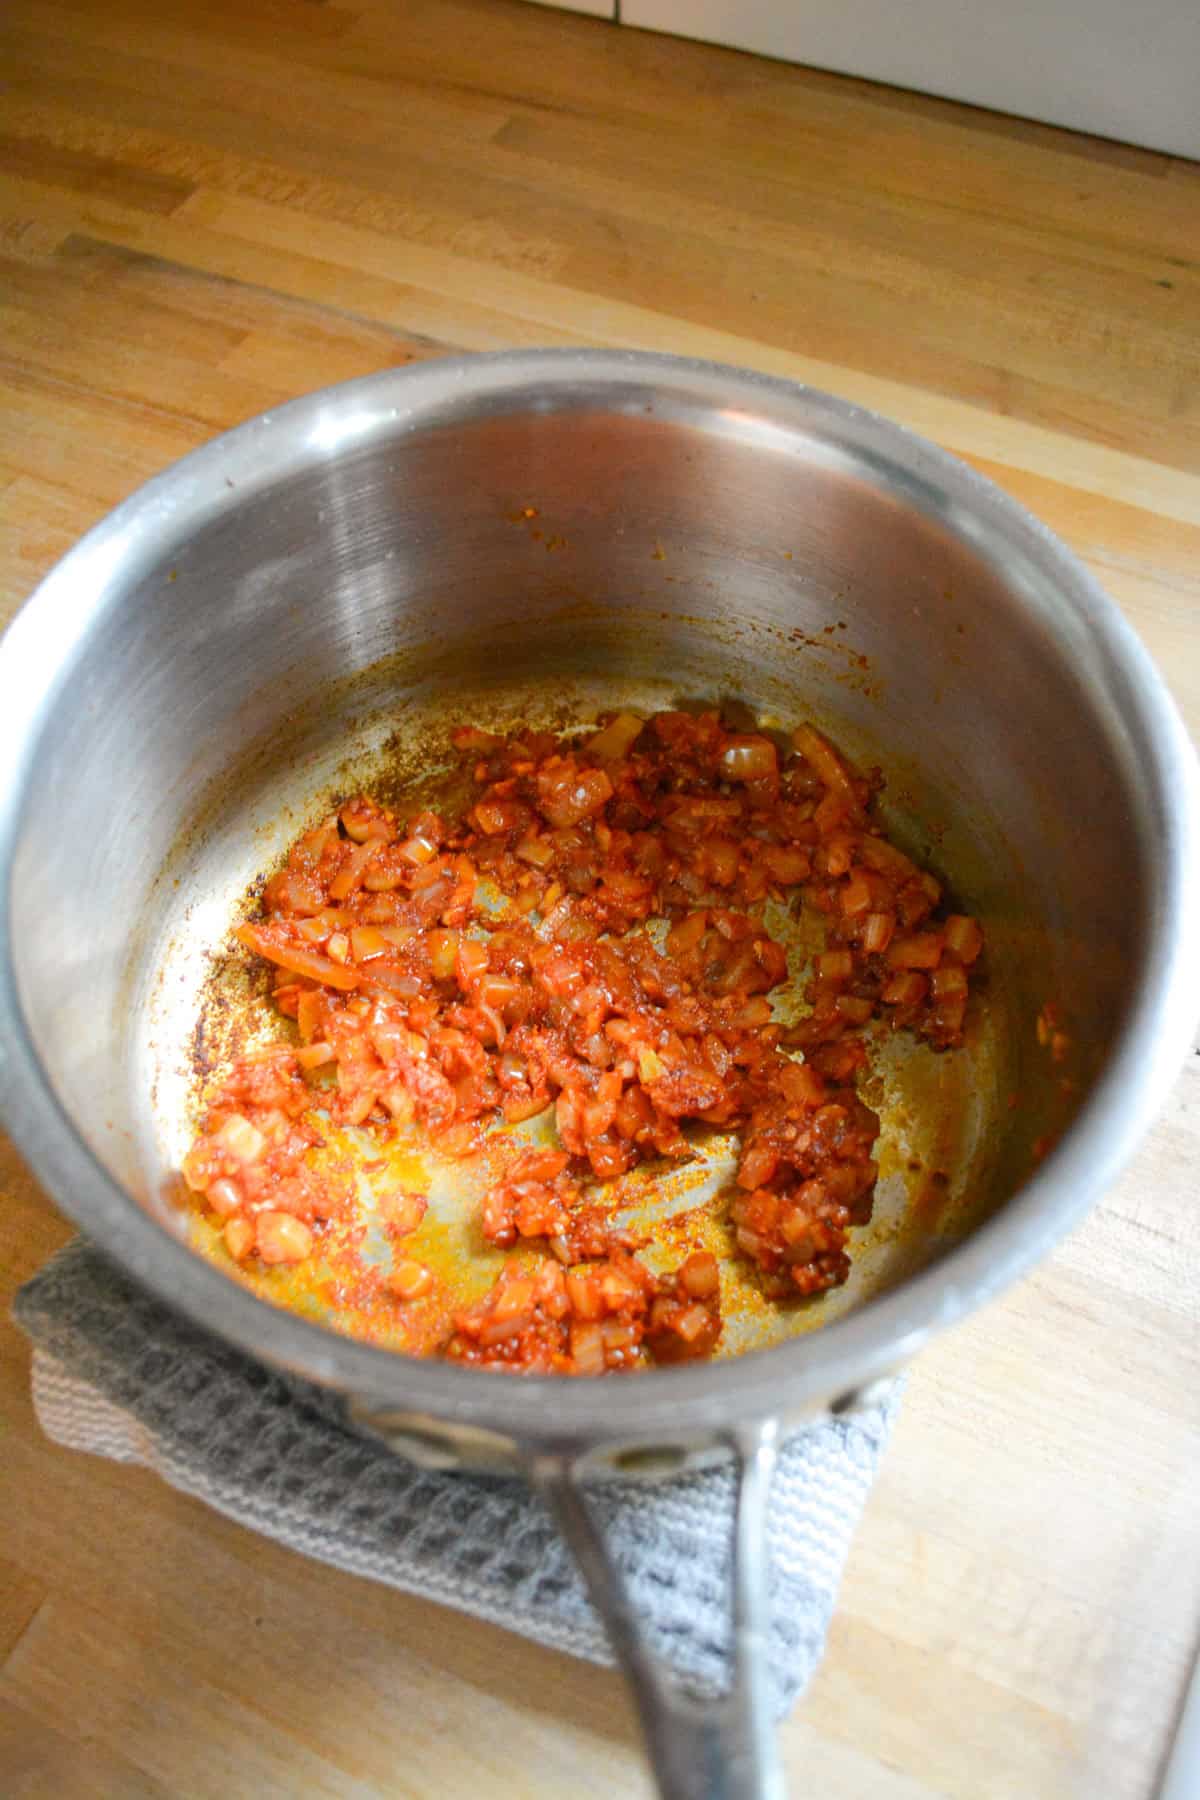 Tomato paste and spices added to the onion in the saucepan.